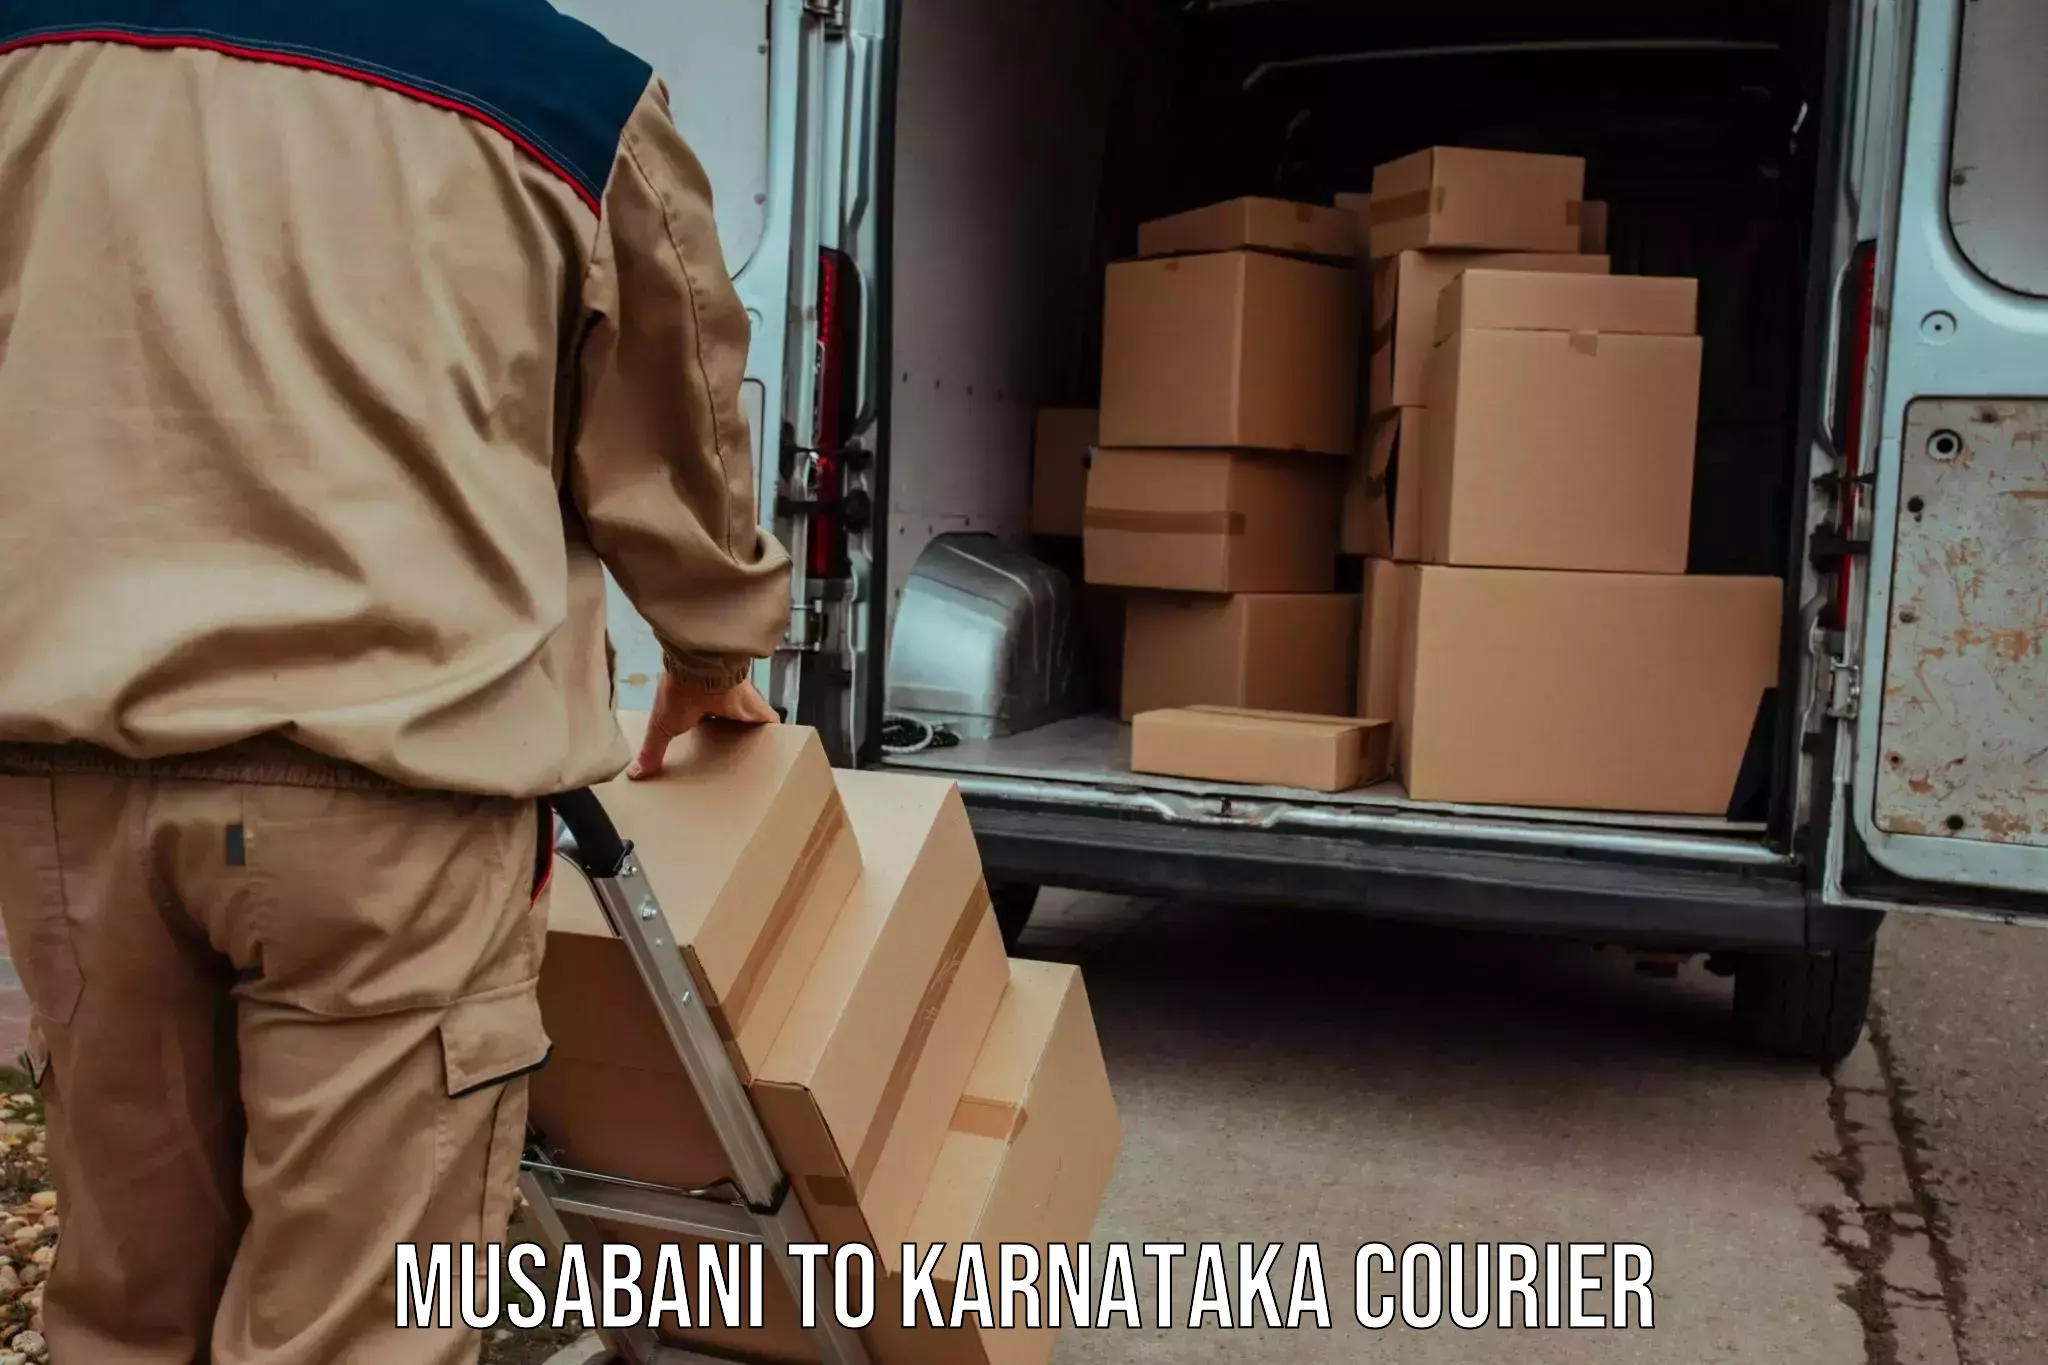 State-of-the-art courier technology Musabani to Chittapur